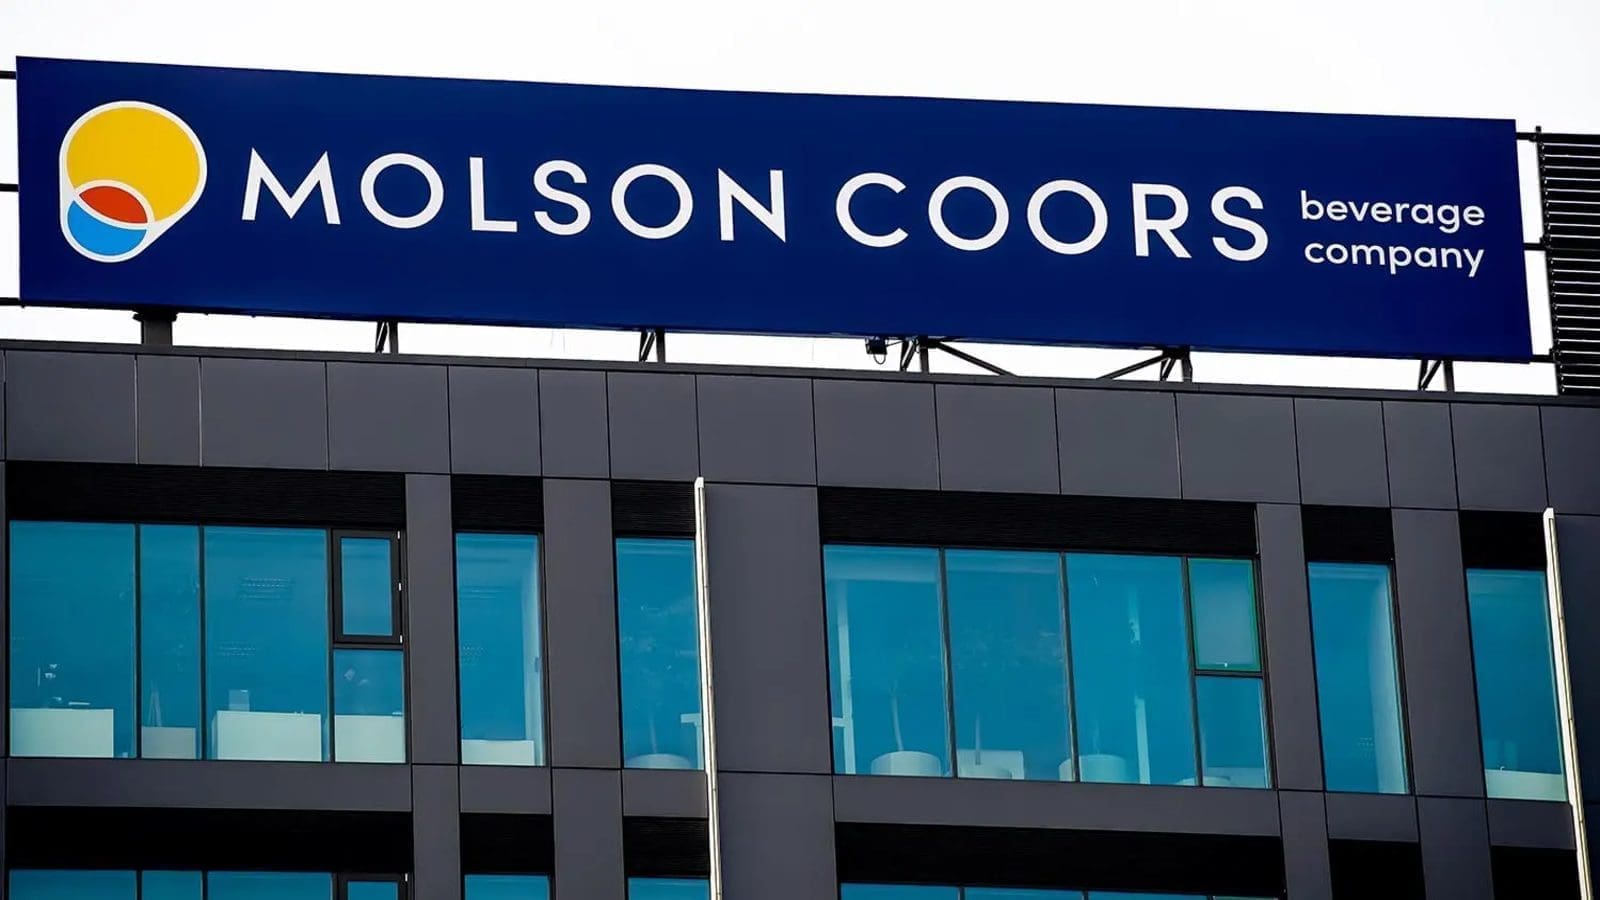 Molson Coors to unwind ties with marijuana producer Hexo Corp and La Colombe Coffee Roasters